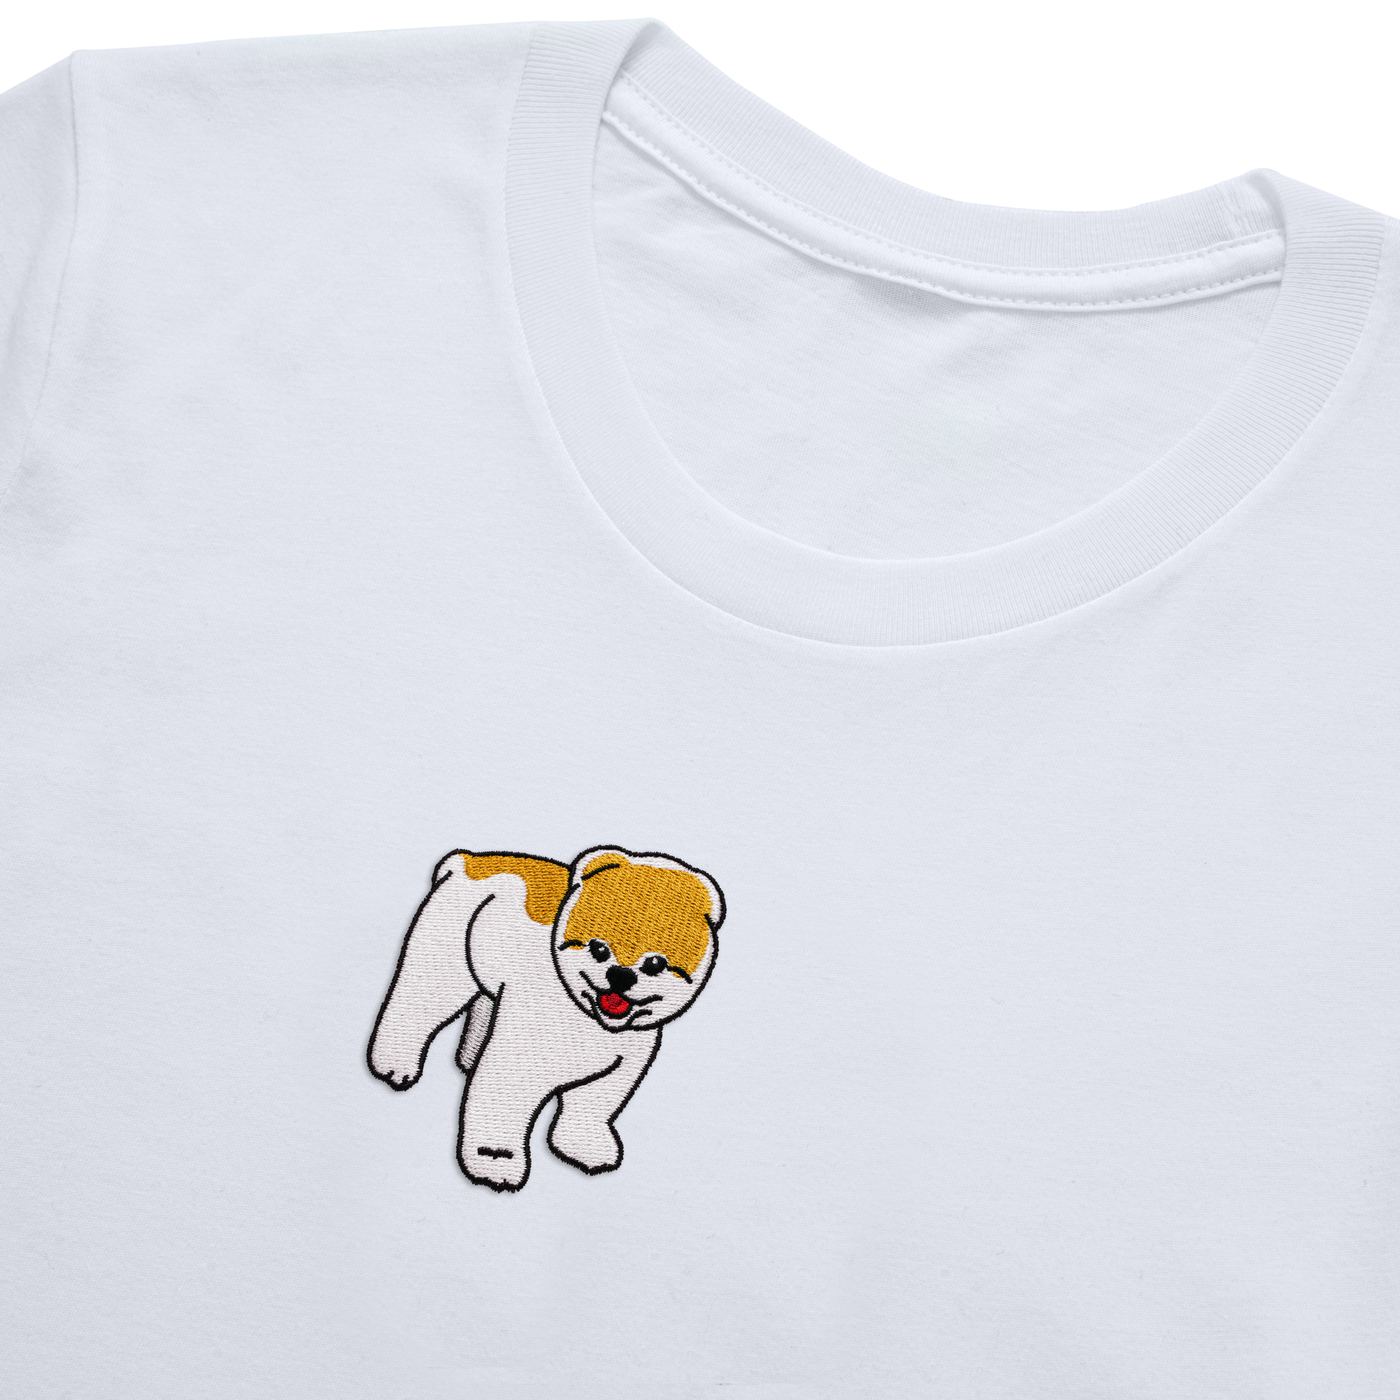 Bobby's Planet Kids Embroidered Pomeranian T-Shirt from Paws Dog Cat Animals Collection in White Color#color_white